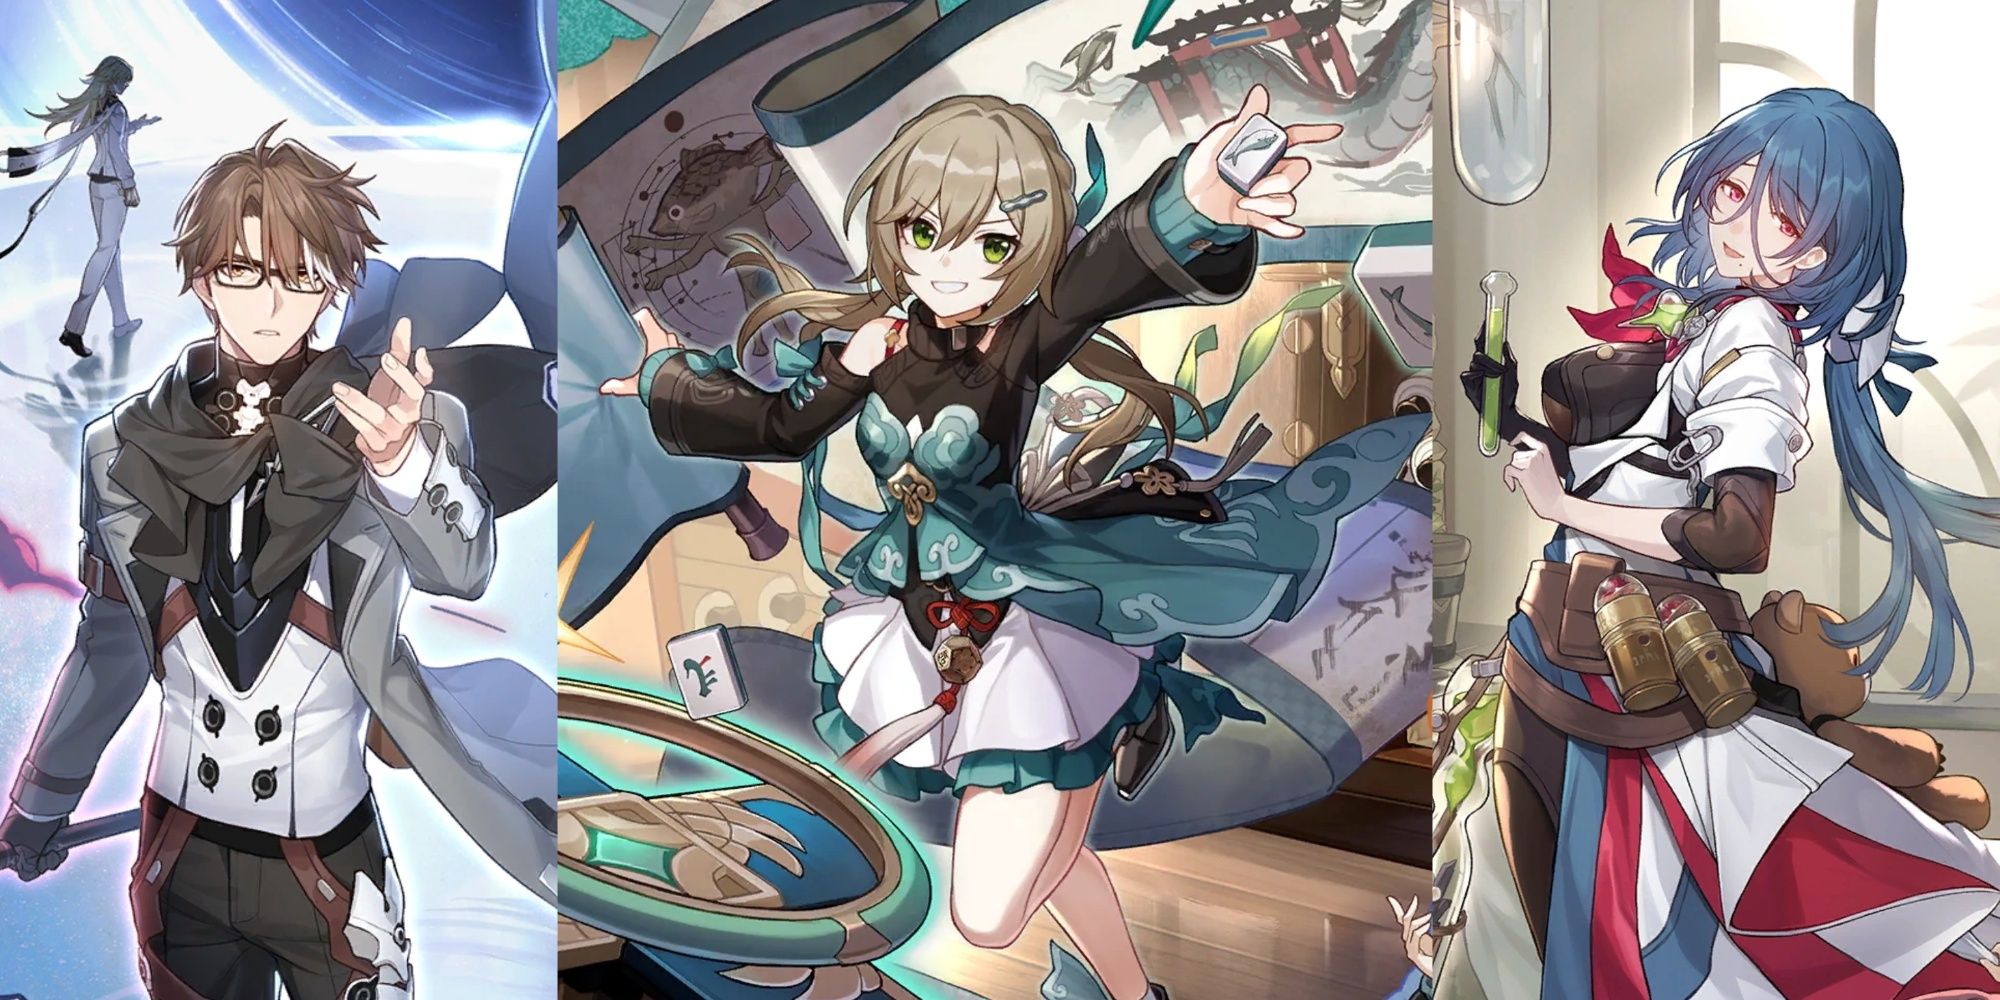 Best Teammates for Qingque in Honkai Star Rail, featuring Welt, Qingque, and Natasha